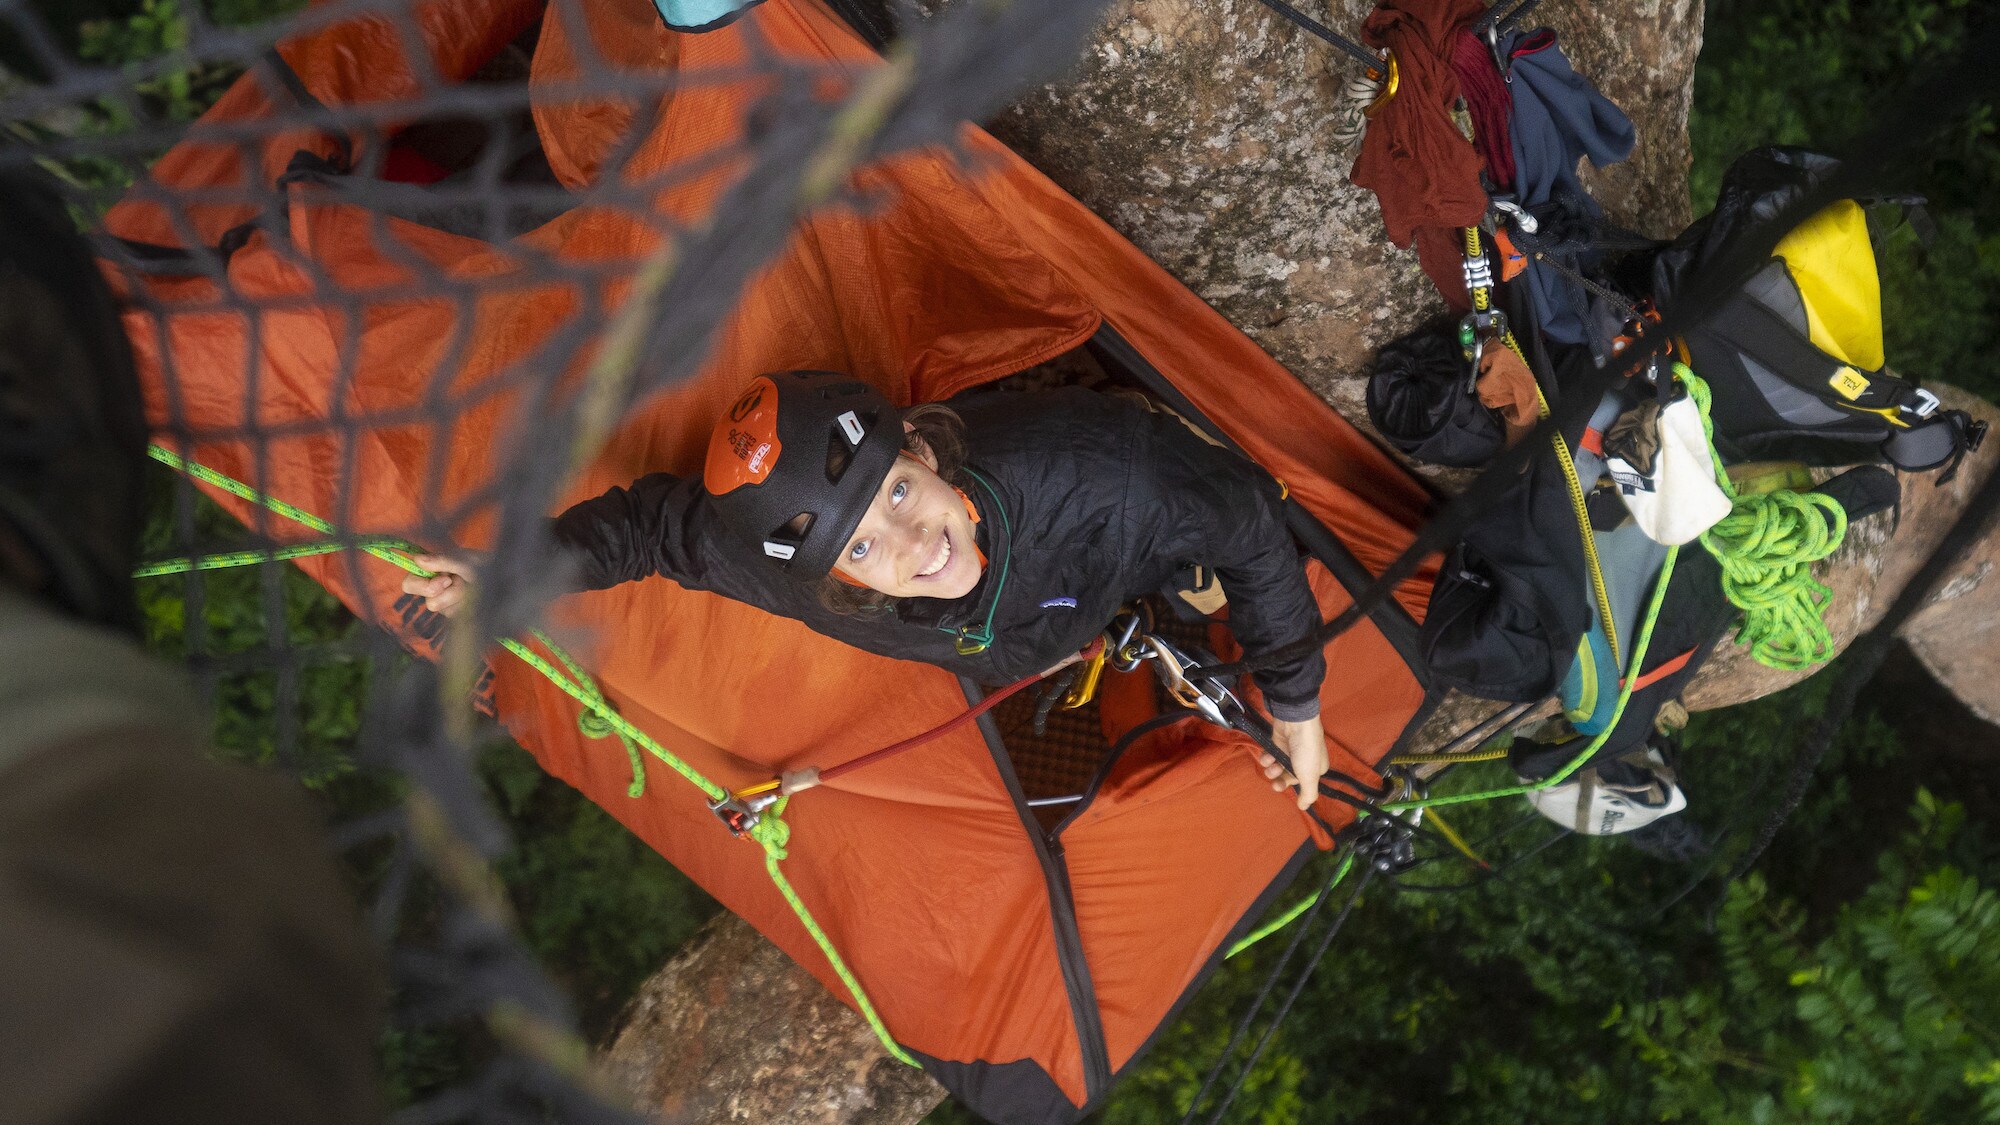 Megan Donaldson looking up at camera from her canopy tent. (National Geographic for Disney+/Waldo Etherington)